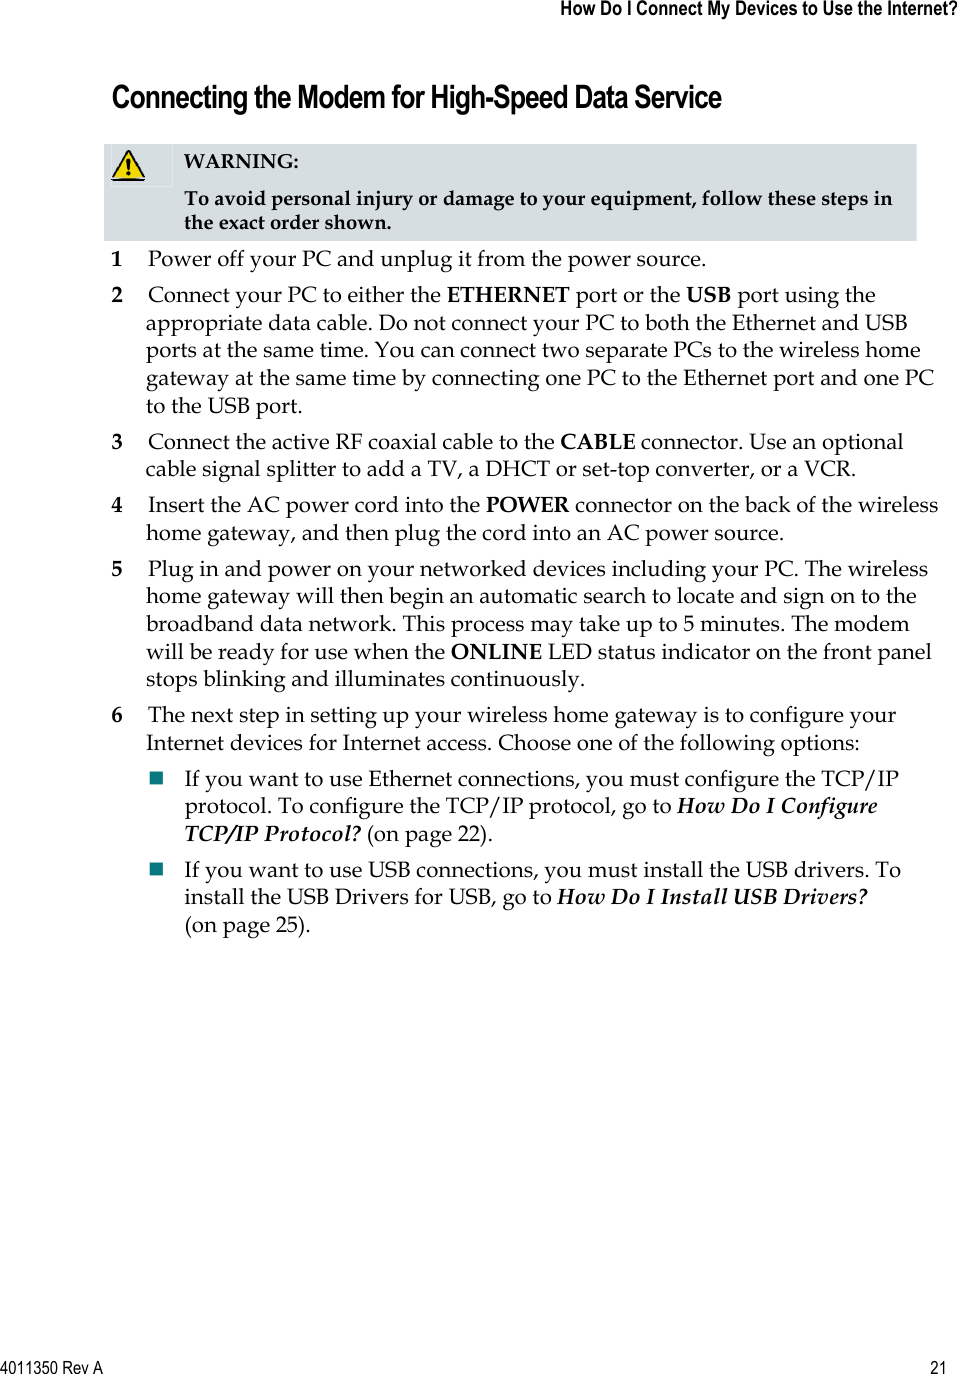 4011350 Rev A    21   How Do I Connect My Devices to Use the Internet?Connecting the Modem for High-Speed Data Service WARNING:To avoid personal injury or damage to your equipment, follow these steps in the exact order shown.1Power off your PC and unplug it from the power source. 2Connect your PC to either the ETHERNET port or the USB port using the appropriate data cable. Do not connect your PC to both the Ethernet and USB ports at the same time. You can connect two separate PCs to the wireless home gateway at the same time by connecting one PC to the Ethernet port and one PC to the USB port. 3Connect the active RF coaxial cable to the CABLE connector. Use an optional cable signal splitter to add a TV, a DHCT or set-top converter, or a VCR. 4Insert the AC power cord into the POWER connector on the back of the wireless home gateway, and then plug the cord into an AC power source. 5Plug in and power on your networked devices including your PC. The wireless home gateway will then begin an automatic search to locate and sign on to the broadband data network. This process may take up to 5 minutes. The modem will be ready for use when the ONLINE LED status indicator on the front panel stops blinking and illuminates continuously. 6The next step in setting up your wireless home gateway is to configure your Internet devices for Internet access. Choose one of the following options: If you want to use Ethernet connections, you must configure the TCP/IP protocol. To configure the TCP/IP protocol, go to How Do I Configure TCP/IP Protocol? (on page 22).If you want to use USB connections, you must install the USB drivers. To install the USB Drivers for USB, go to How Do I Install USB Drivers?(on page 25). 